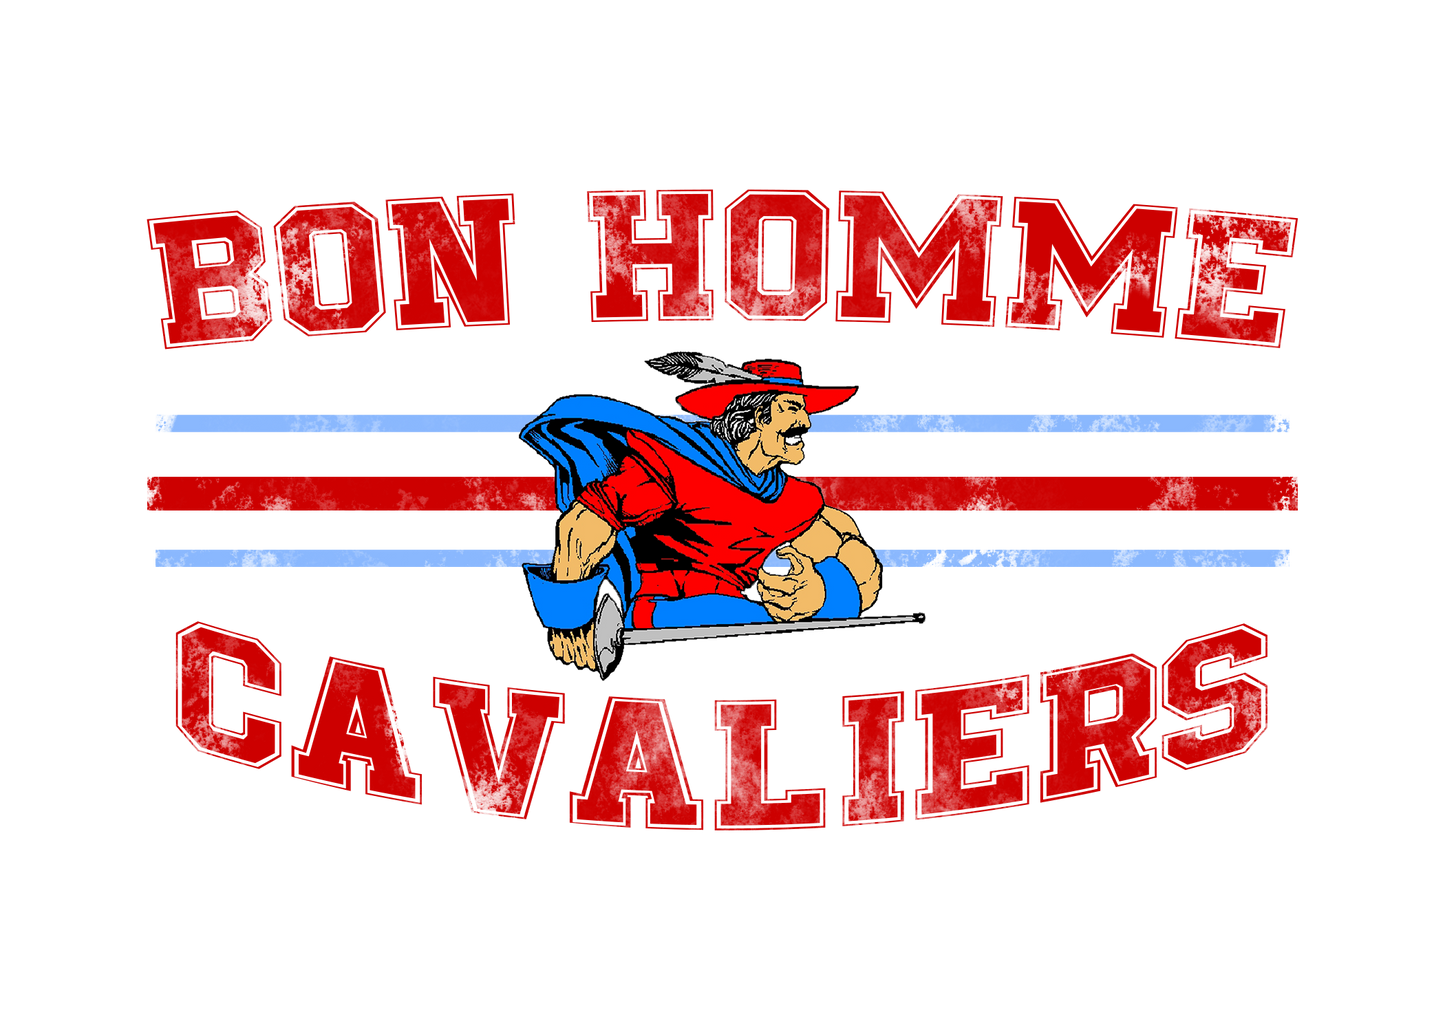 Youth Bon Homme Cavaliers Distressed Short Sleeve